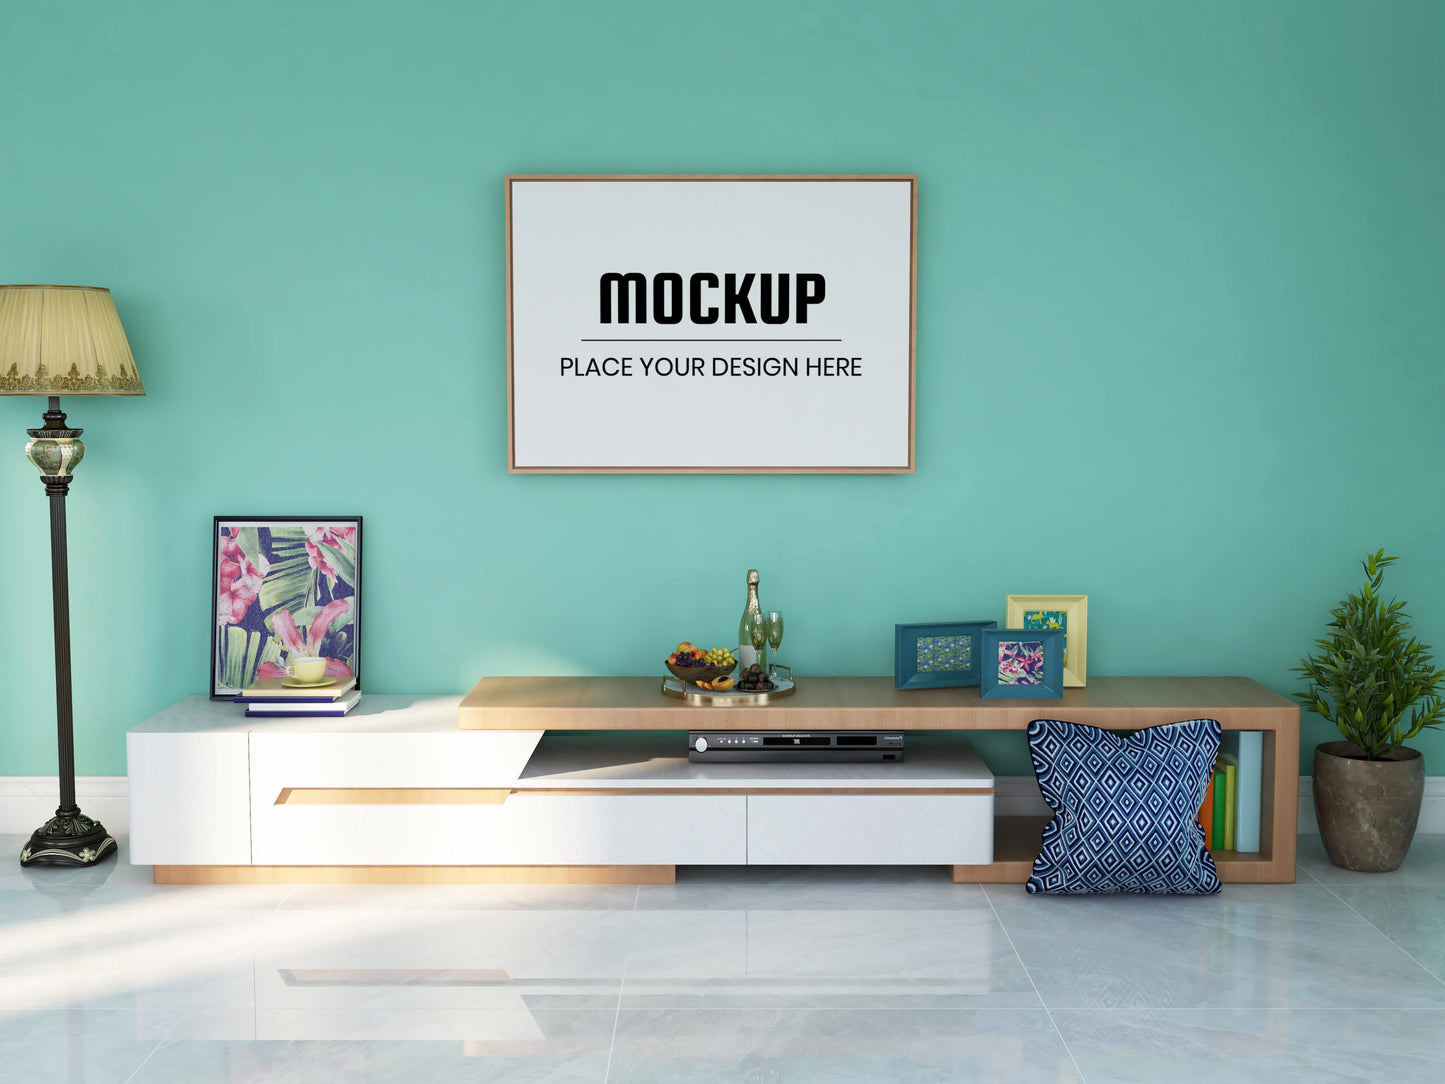 Free Photo Frame Mockup Realistic In The Living Room